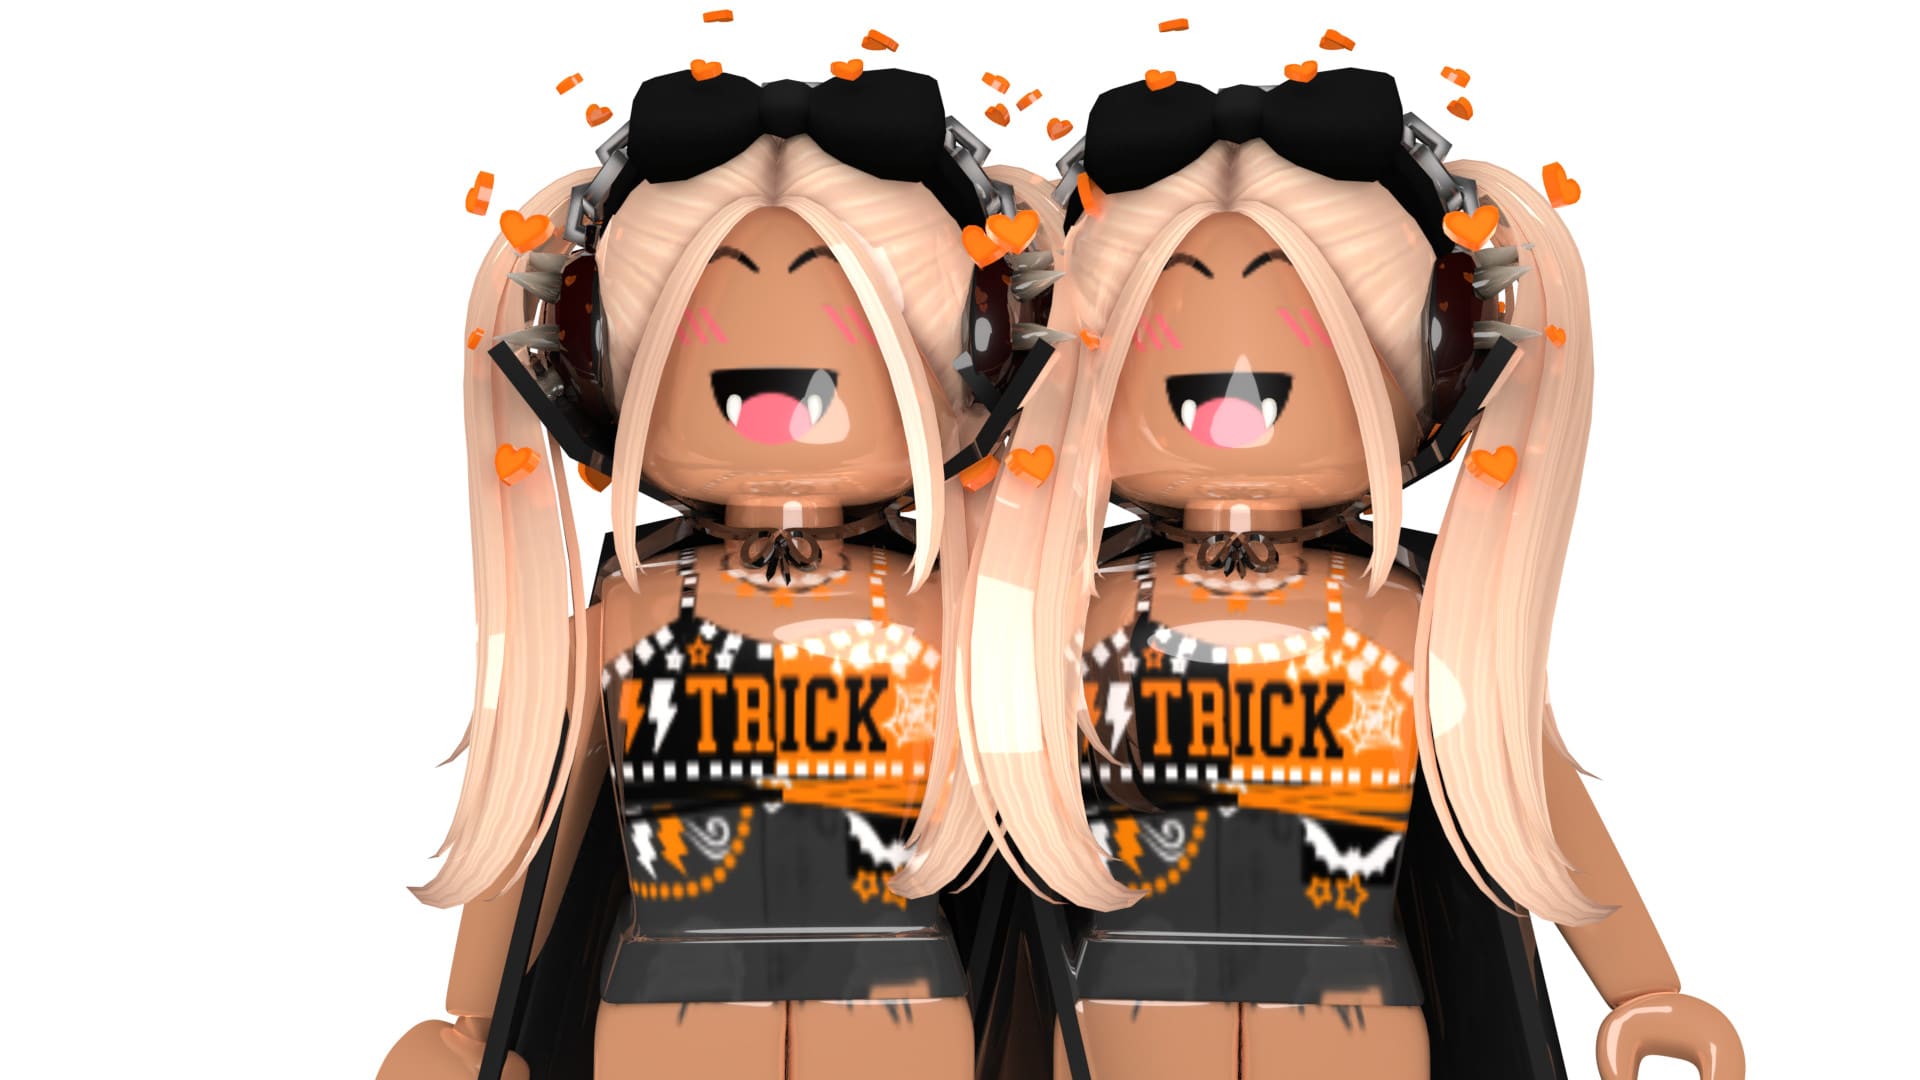 girl #roblox #gfx #png #stickers #shopping #chanel - Roblox Gfx Girl  Aesthetic, Transparent Png, png download, transparent png image